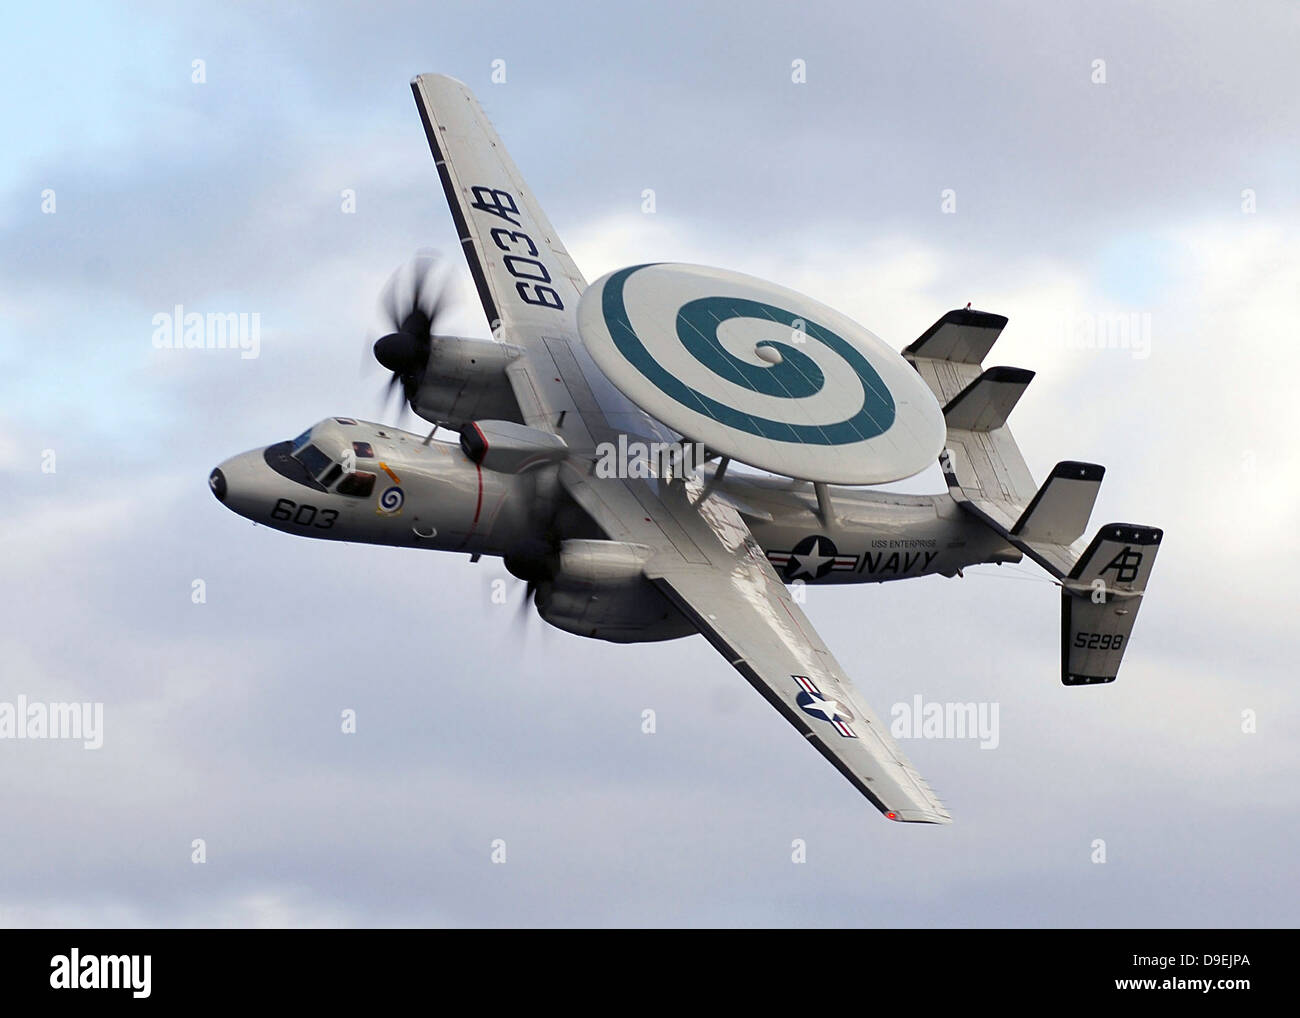 An E-2C Hawkeye performs a fly-by during an air power demonstration. Stock Photo